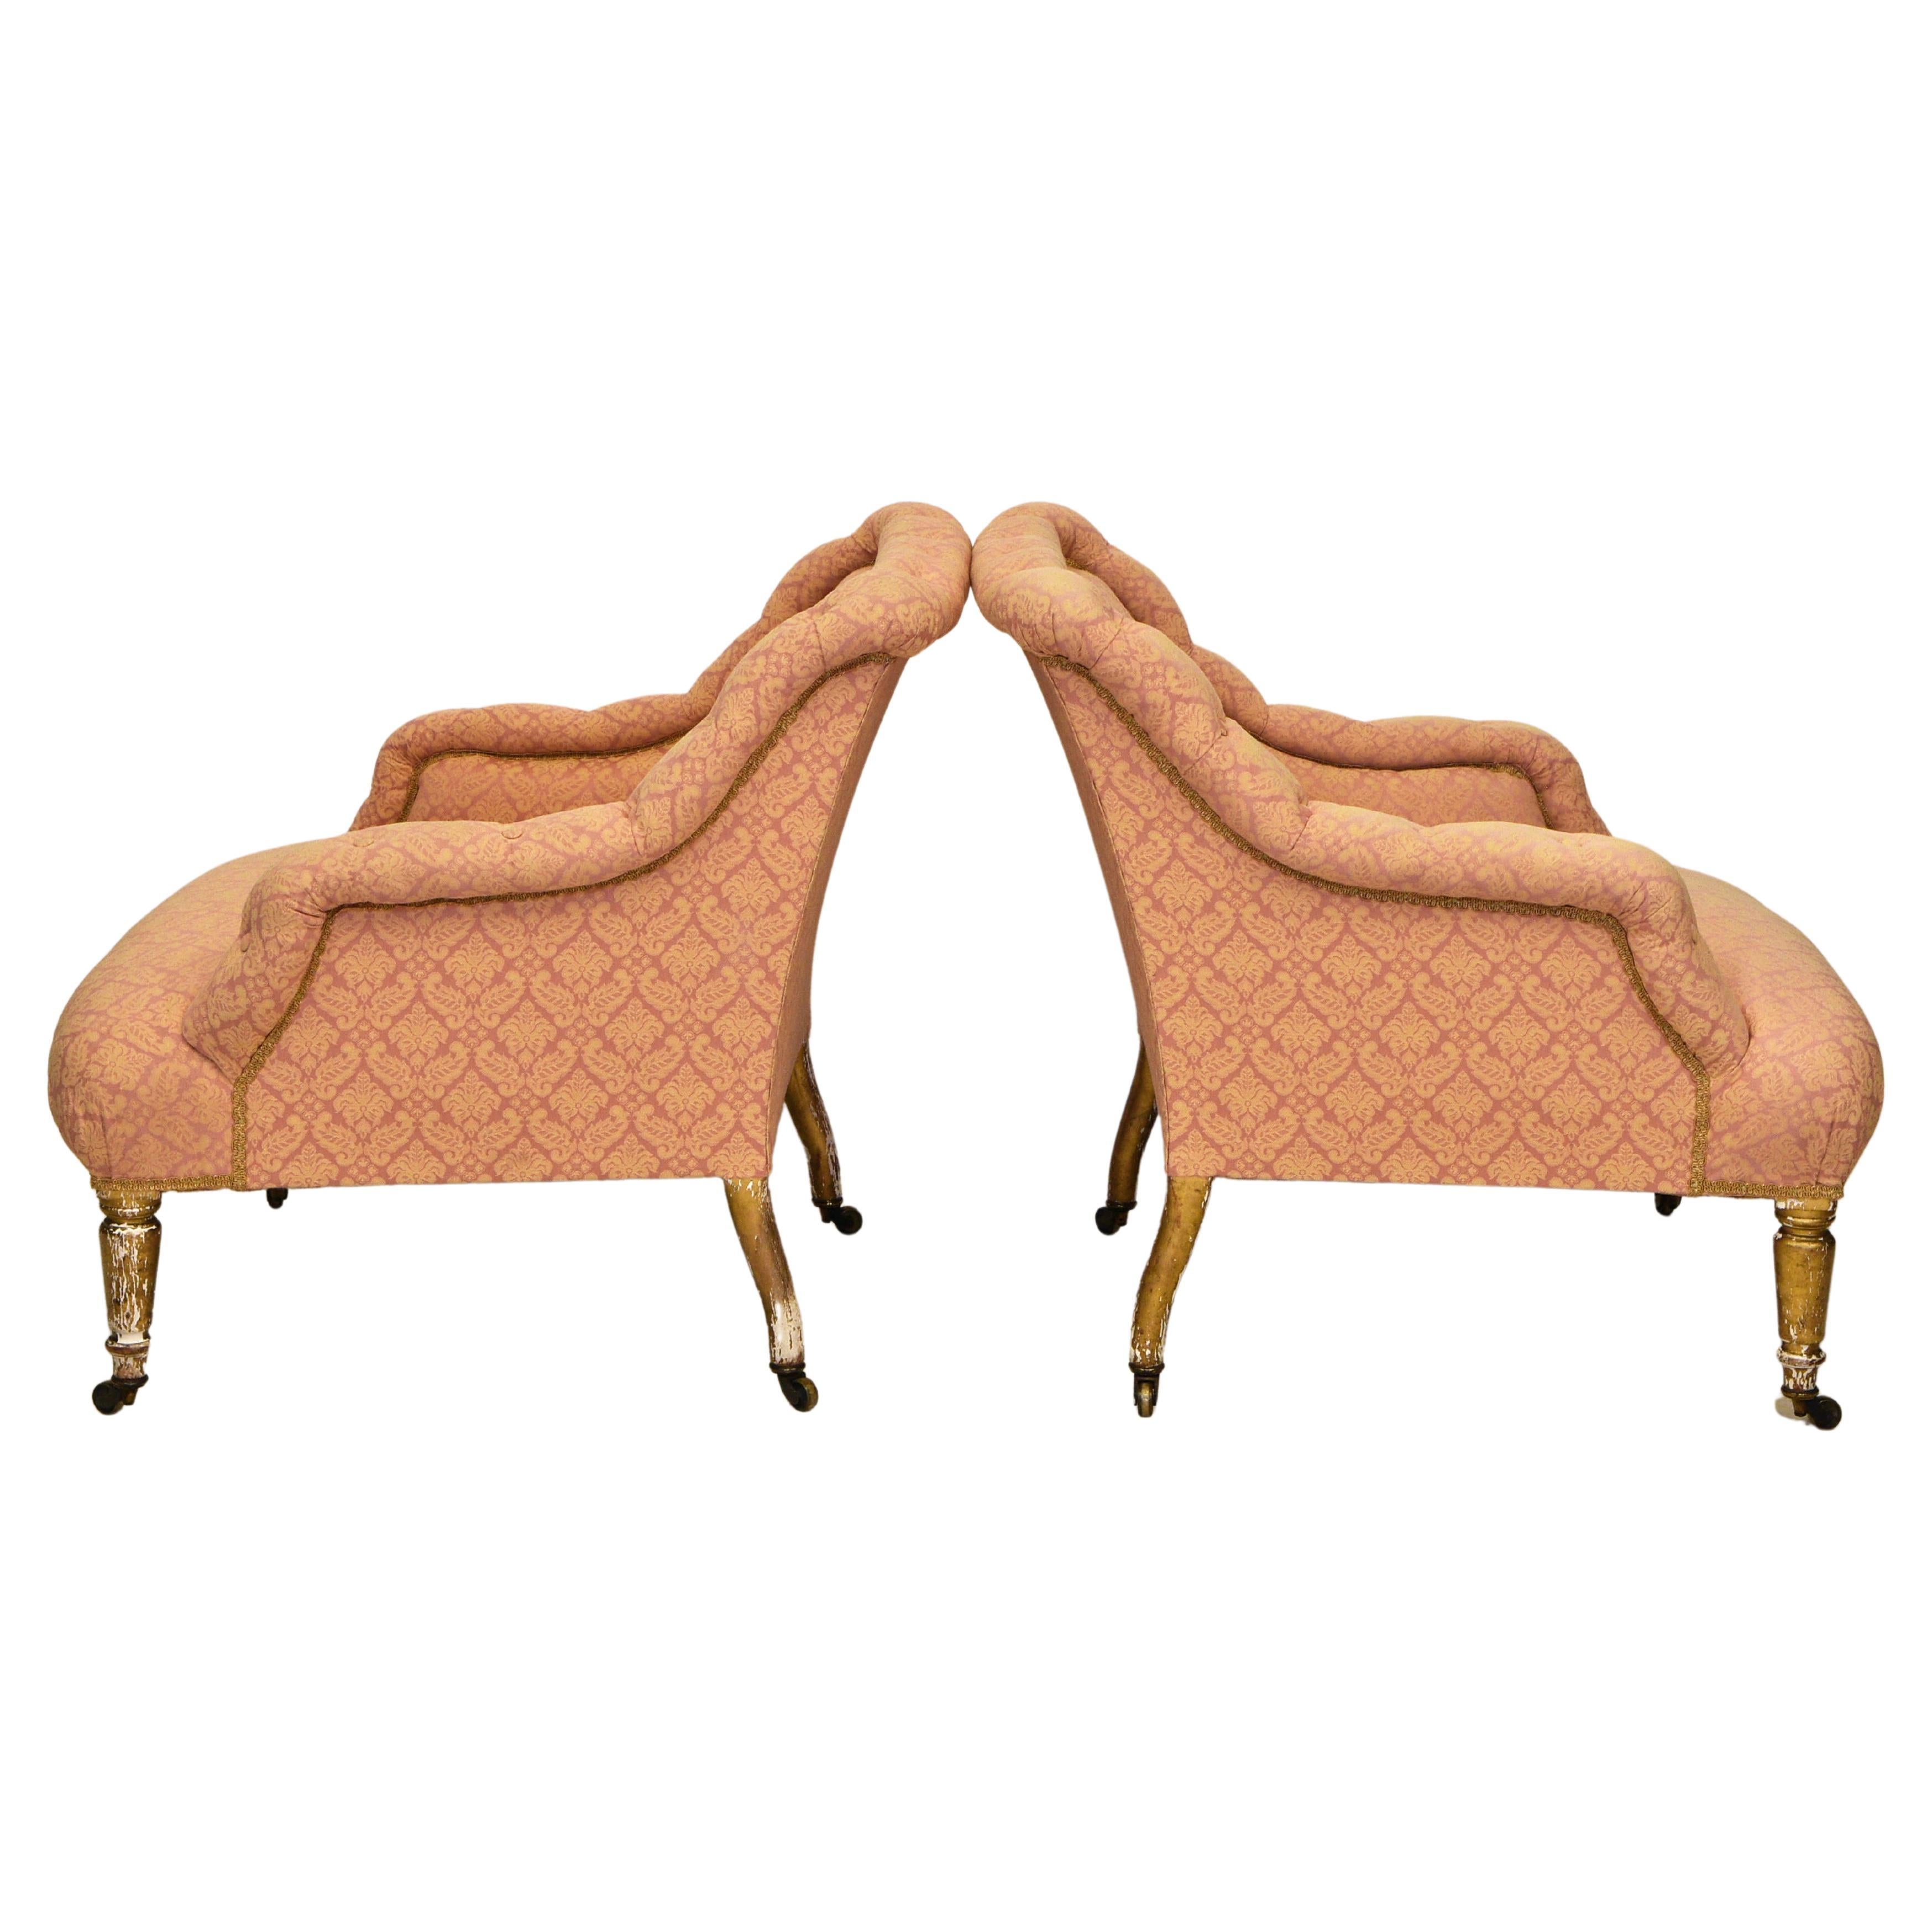 Victorian Pair of Antique Upholstered & Giltwood Armchairs by Mellier & Co London For Sale